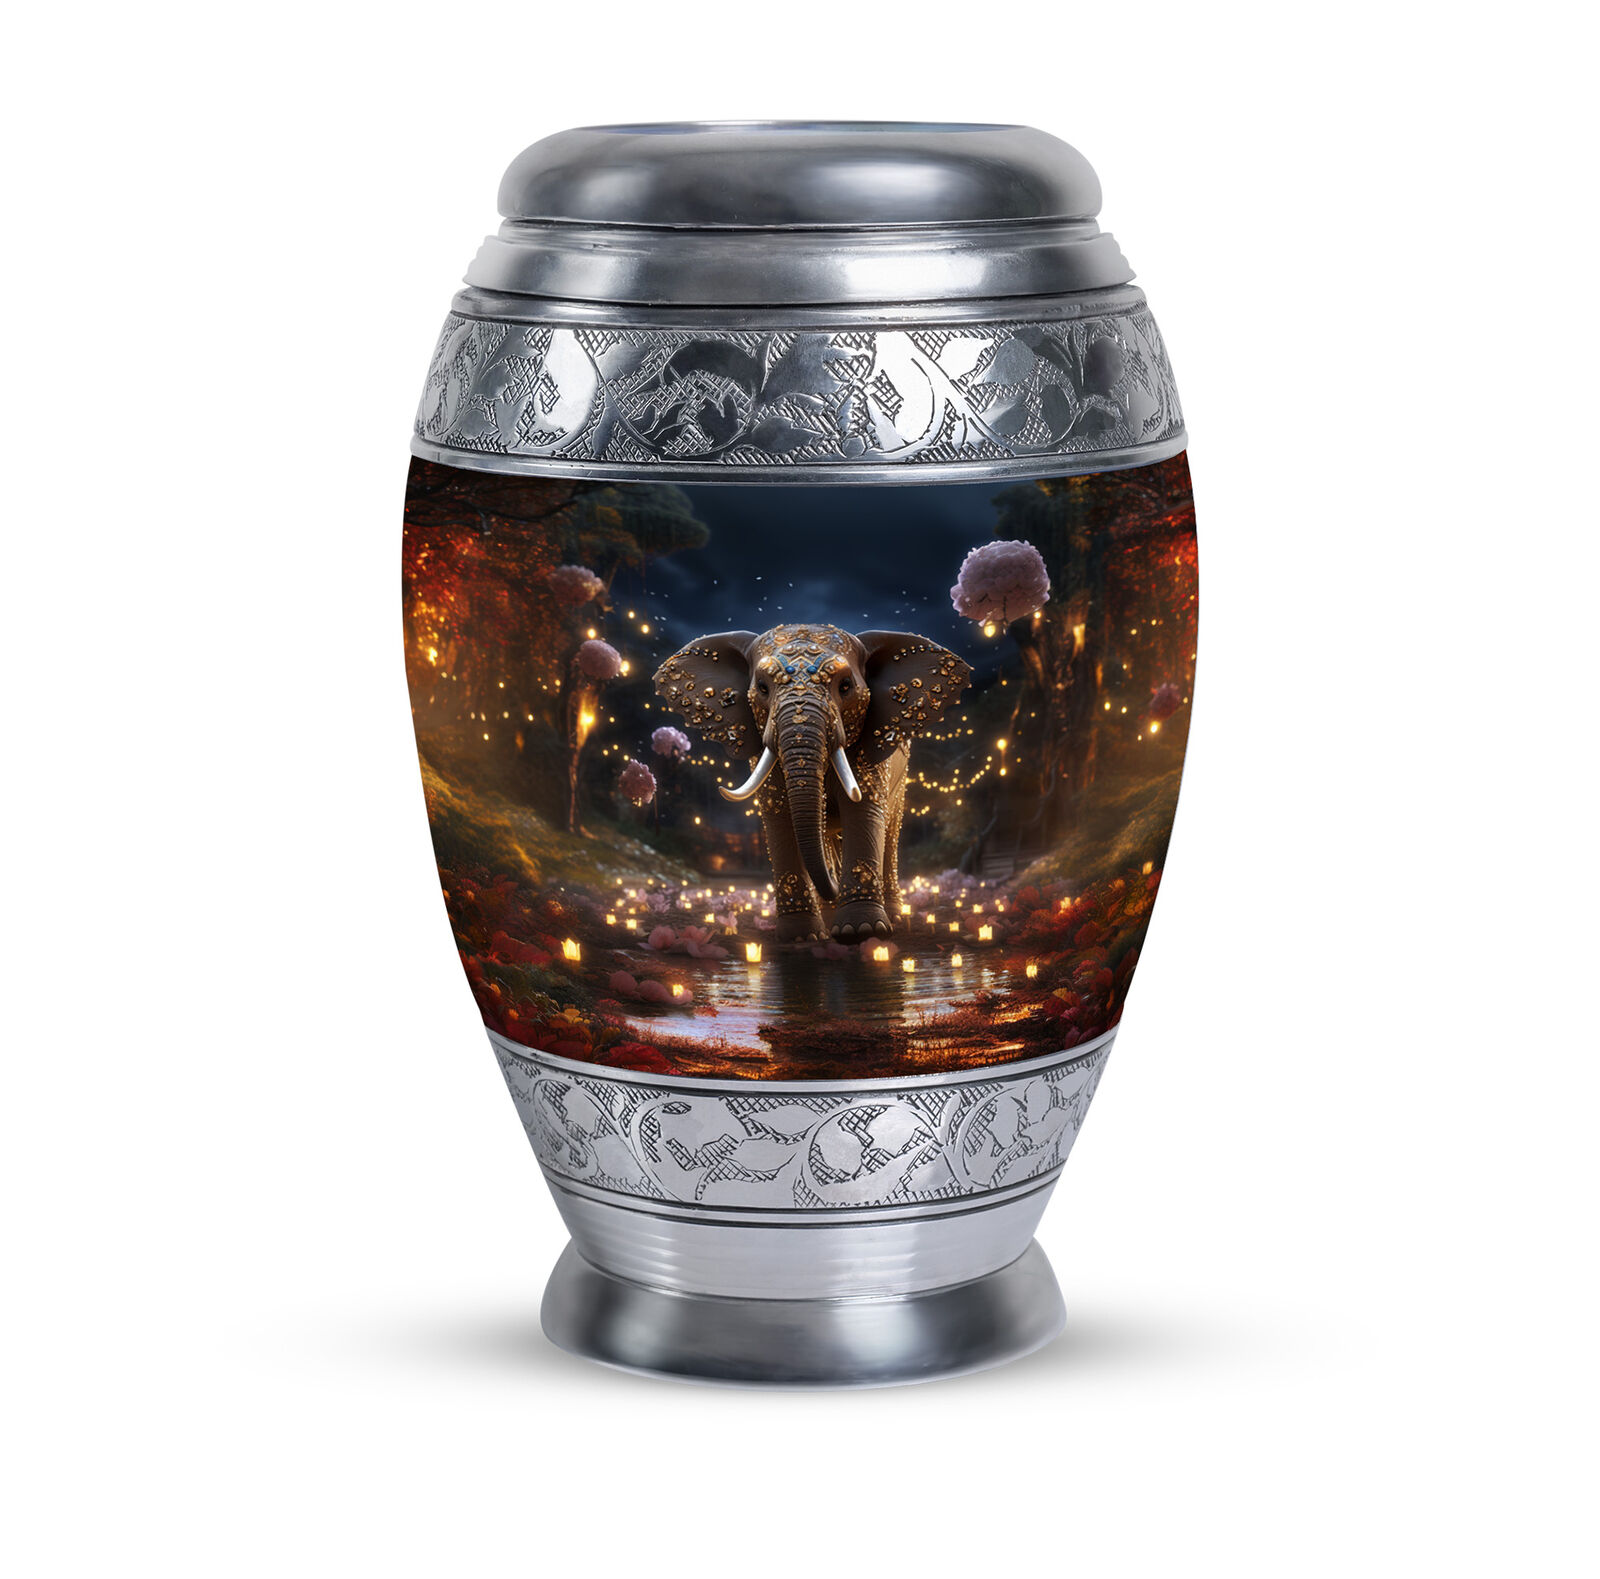 Cremation Urns For Burial Elephant Walk In River (10 Inch) Large Urn